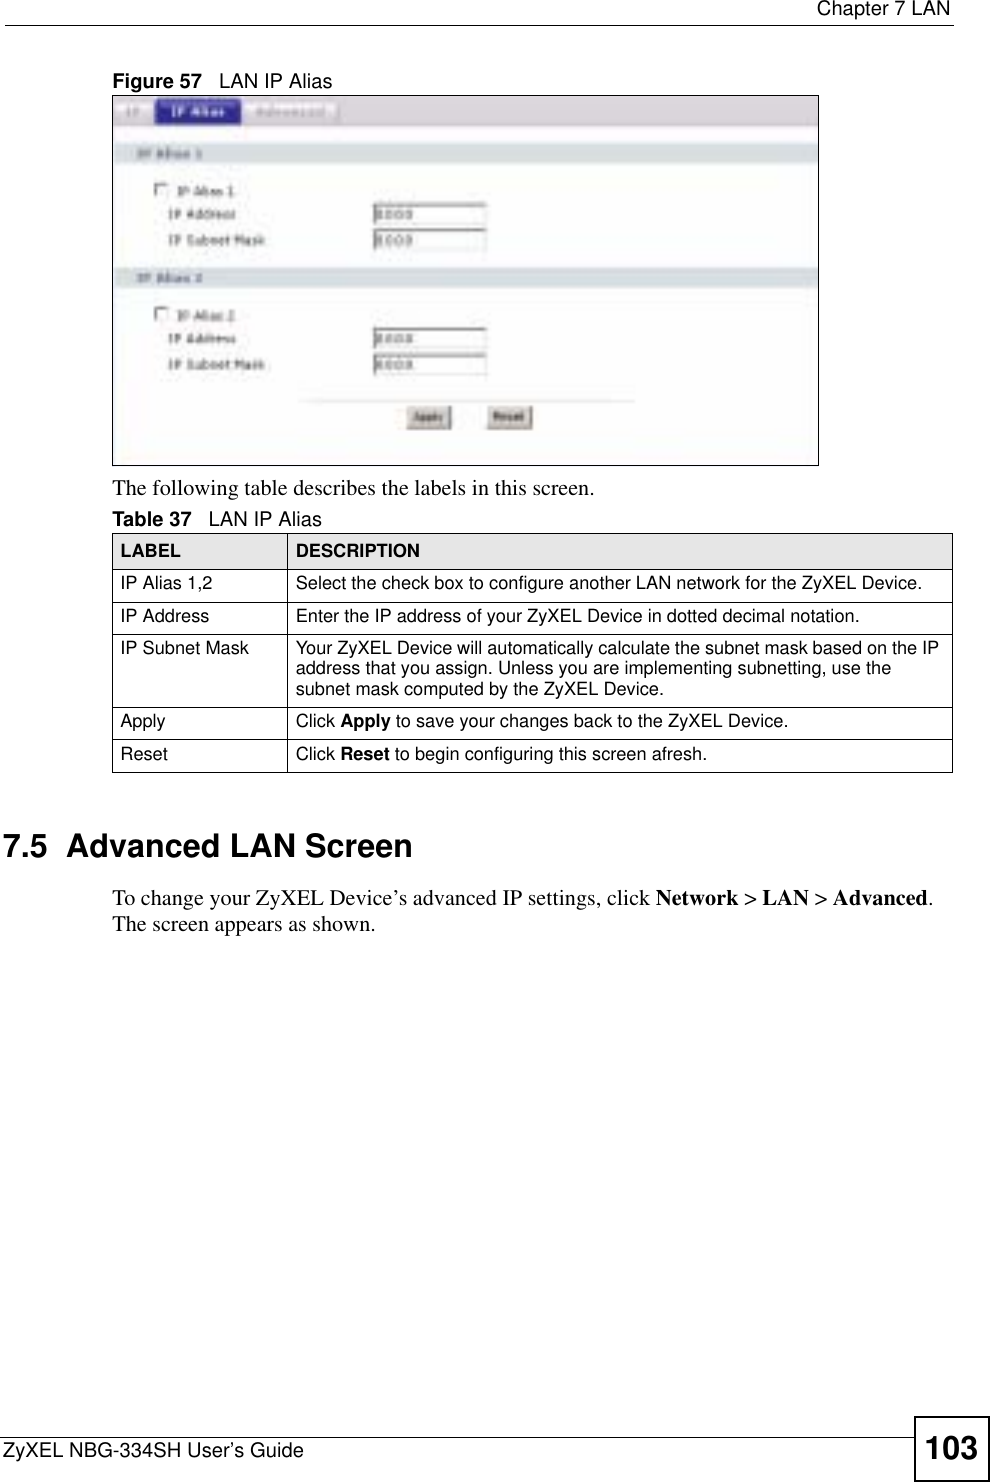  Chapter 7 LANZyXEL NBG-334SH User’s Guide 103Figure 57   LAN IP AliasThe following table describes the labels in this screen.7.5  Advanced LAN ScreenTo change your ZyXEL Device’s advanced IP settings, click Network &gt; LAN &gt; Advanced.The screen appears as shown.Table 37   LAN IP AliasLABEL DESCRIPTIONIP Alias 1,2 Select the check box to configure another LAN network for the ZyXEL Device.IP Address Enter the IP address of your ZyXEL Device in dotted decimal notation. IP Subnet Mask Your ZyXEL Device will automatically calculate the subnet mask based on the IP address that you assign. Unless you are implementing subnetting, use the subnet mask computed by the ZyXEL Device.Apply Click Apply to save your changes back to the ZyXEL Device.Reset Click Reset to begin configuring this screen afresh.